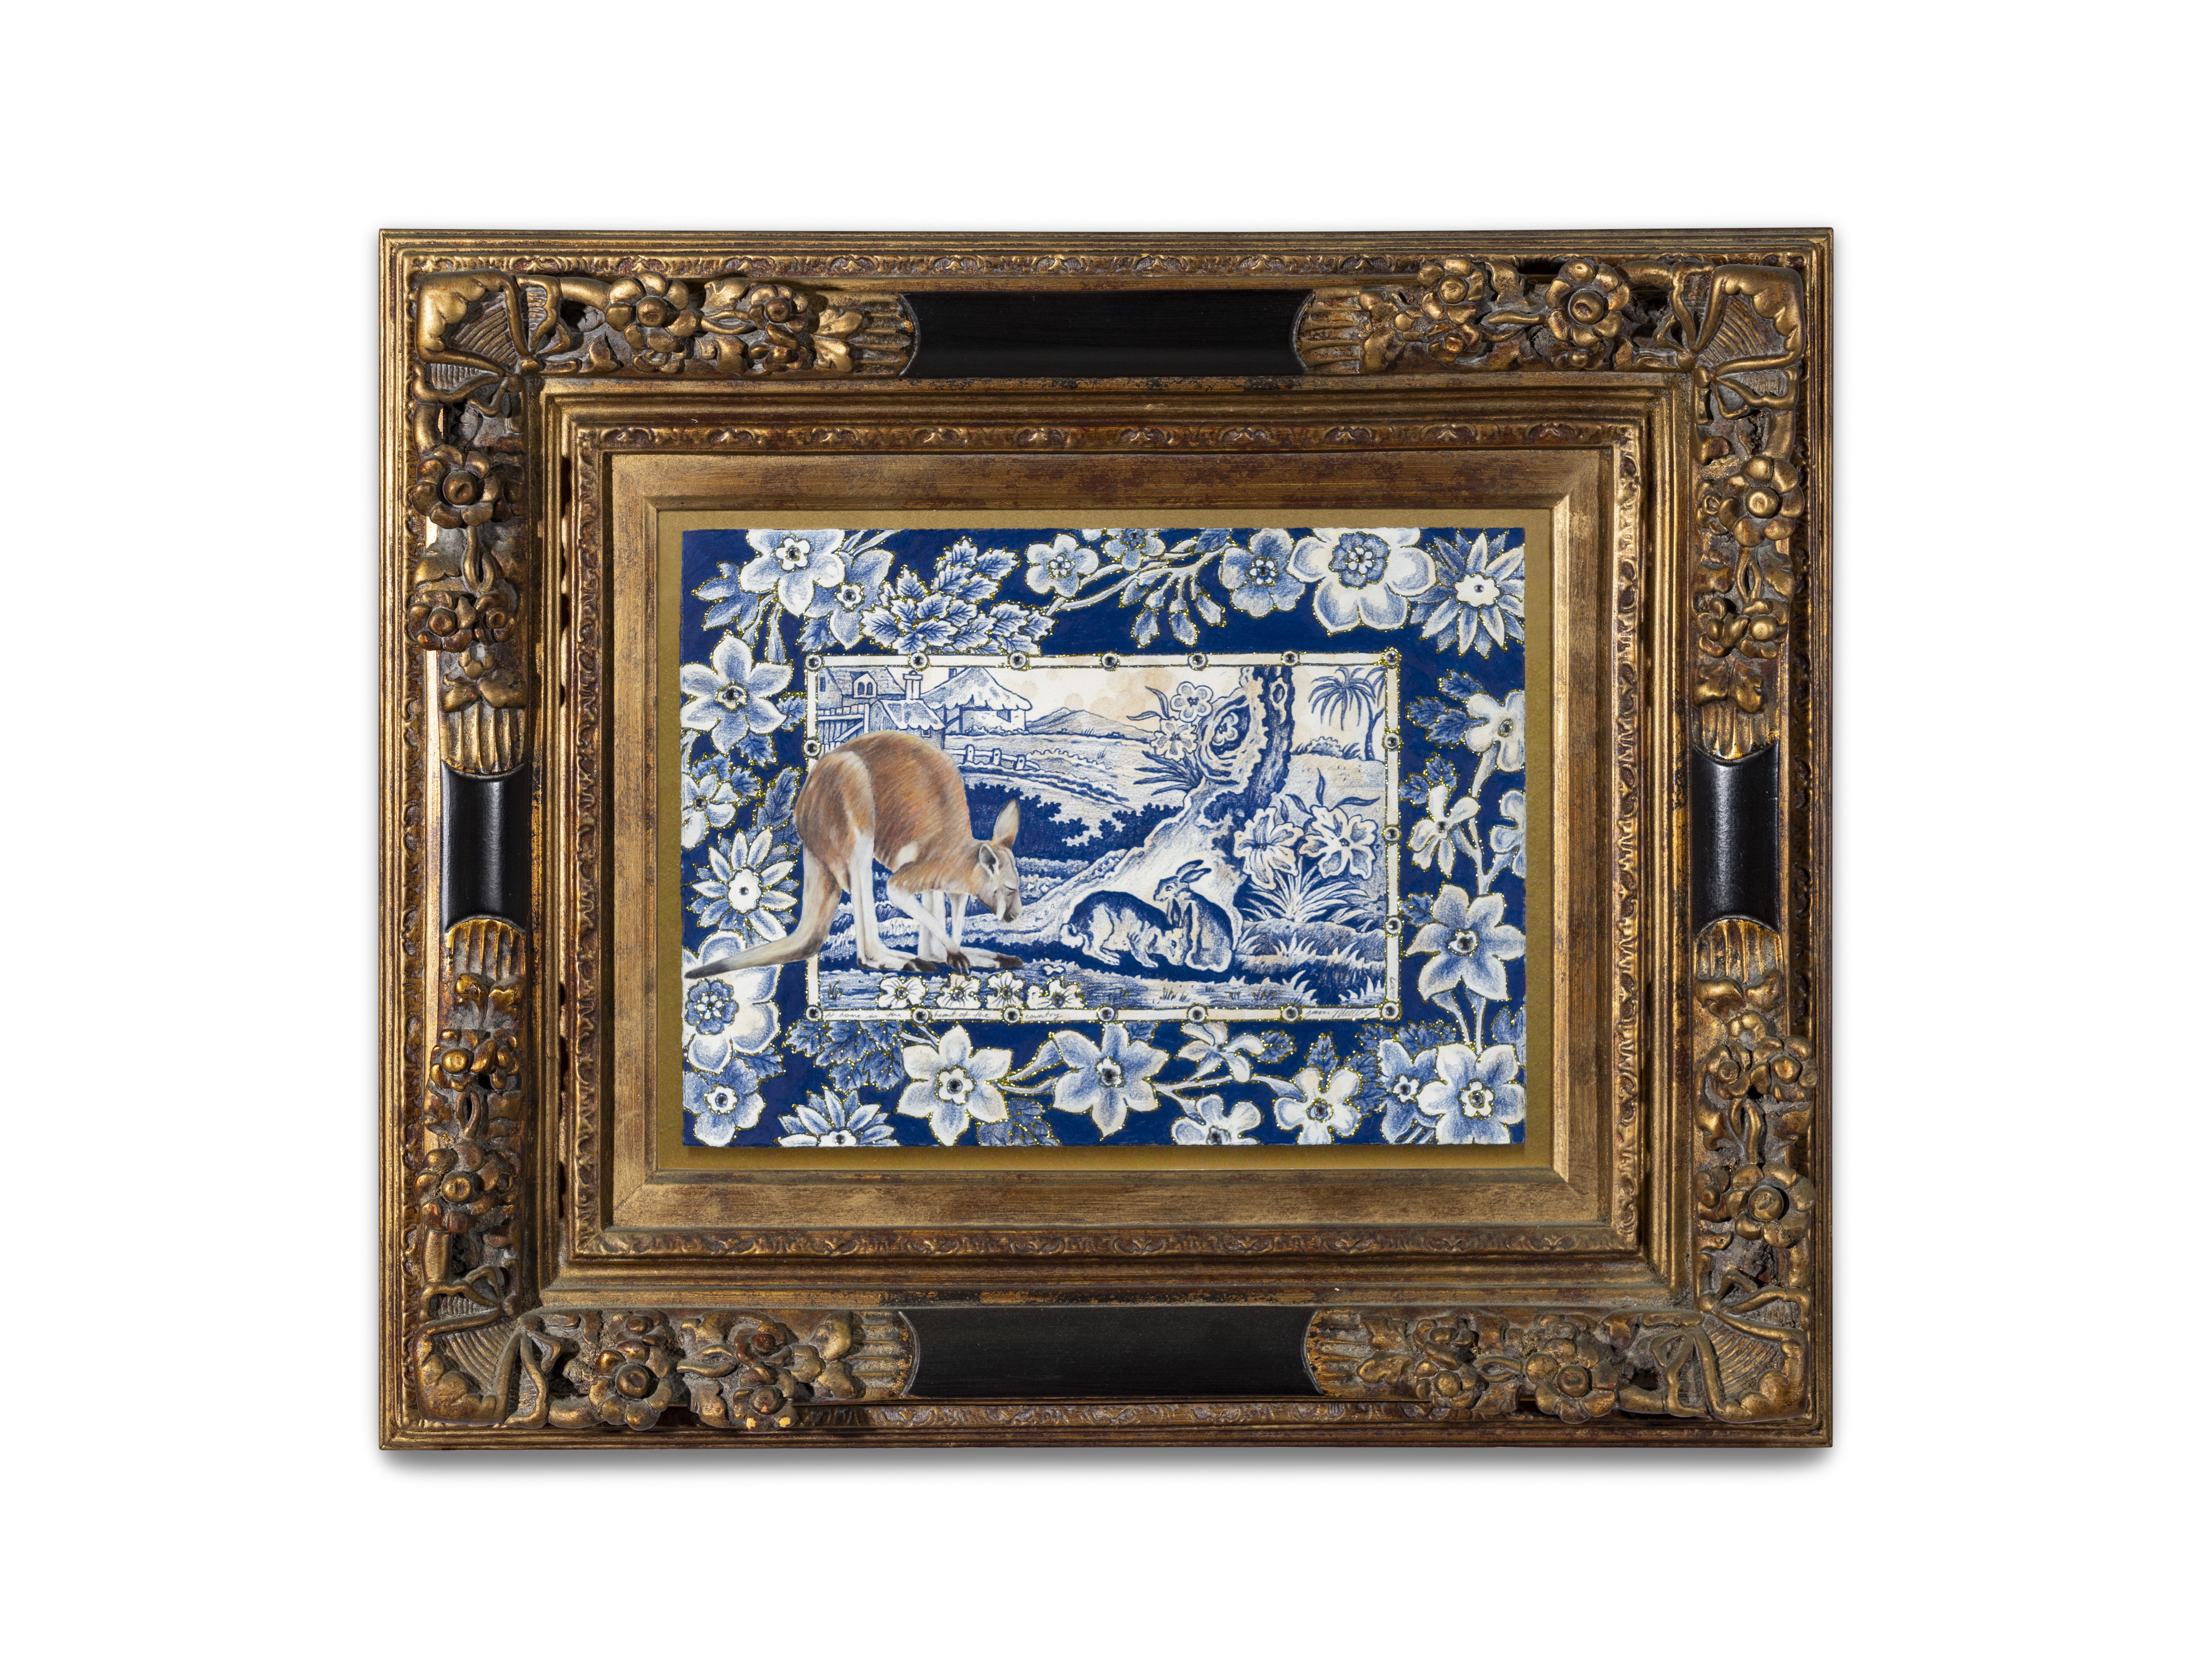 A colour illustration of a kangaroo overlaid on a pastoral scene depicted in blue-and-white, similar to those found on decorative dinnerware. The picture is framed in an ornate gold frame.